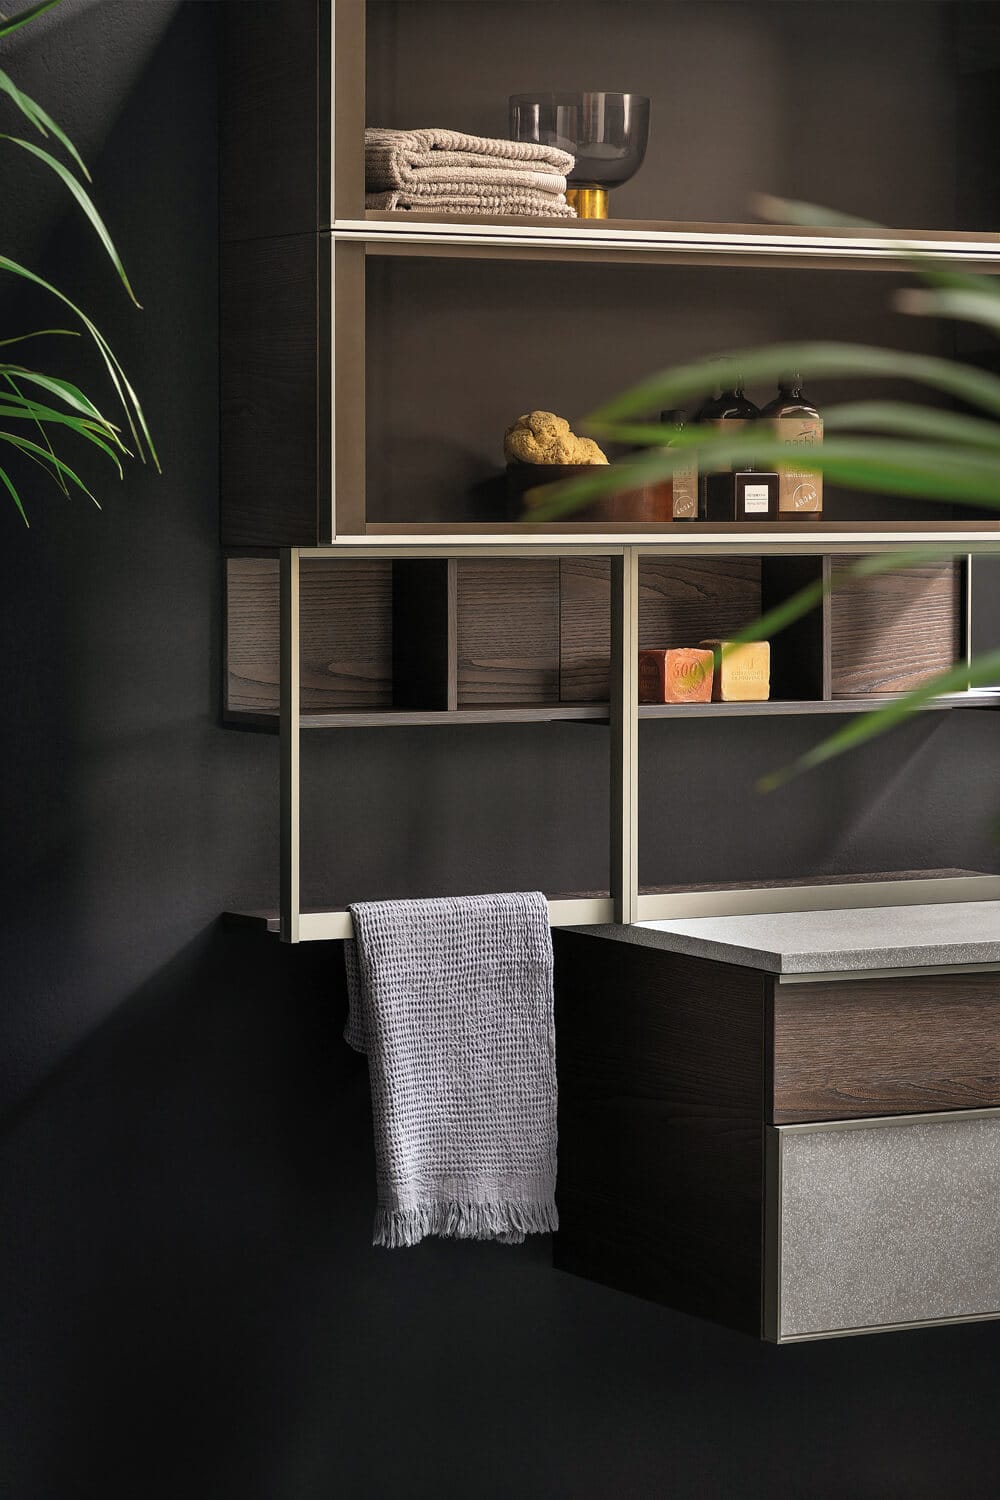 Open shelf system with a Titanium aluminum frame doubling up as towel rack.